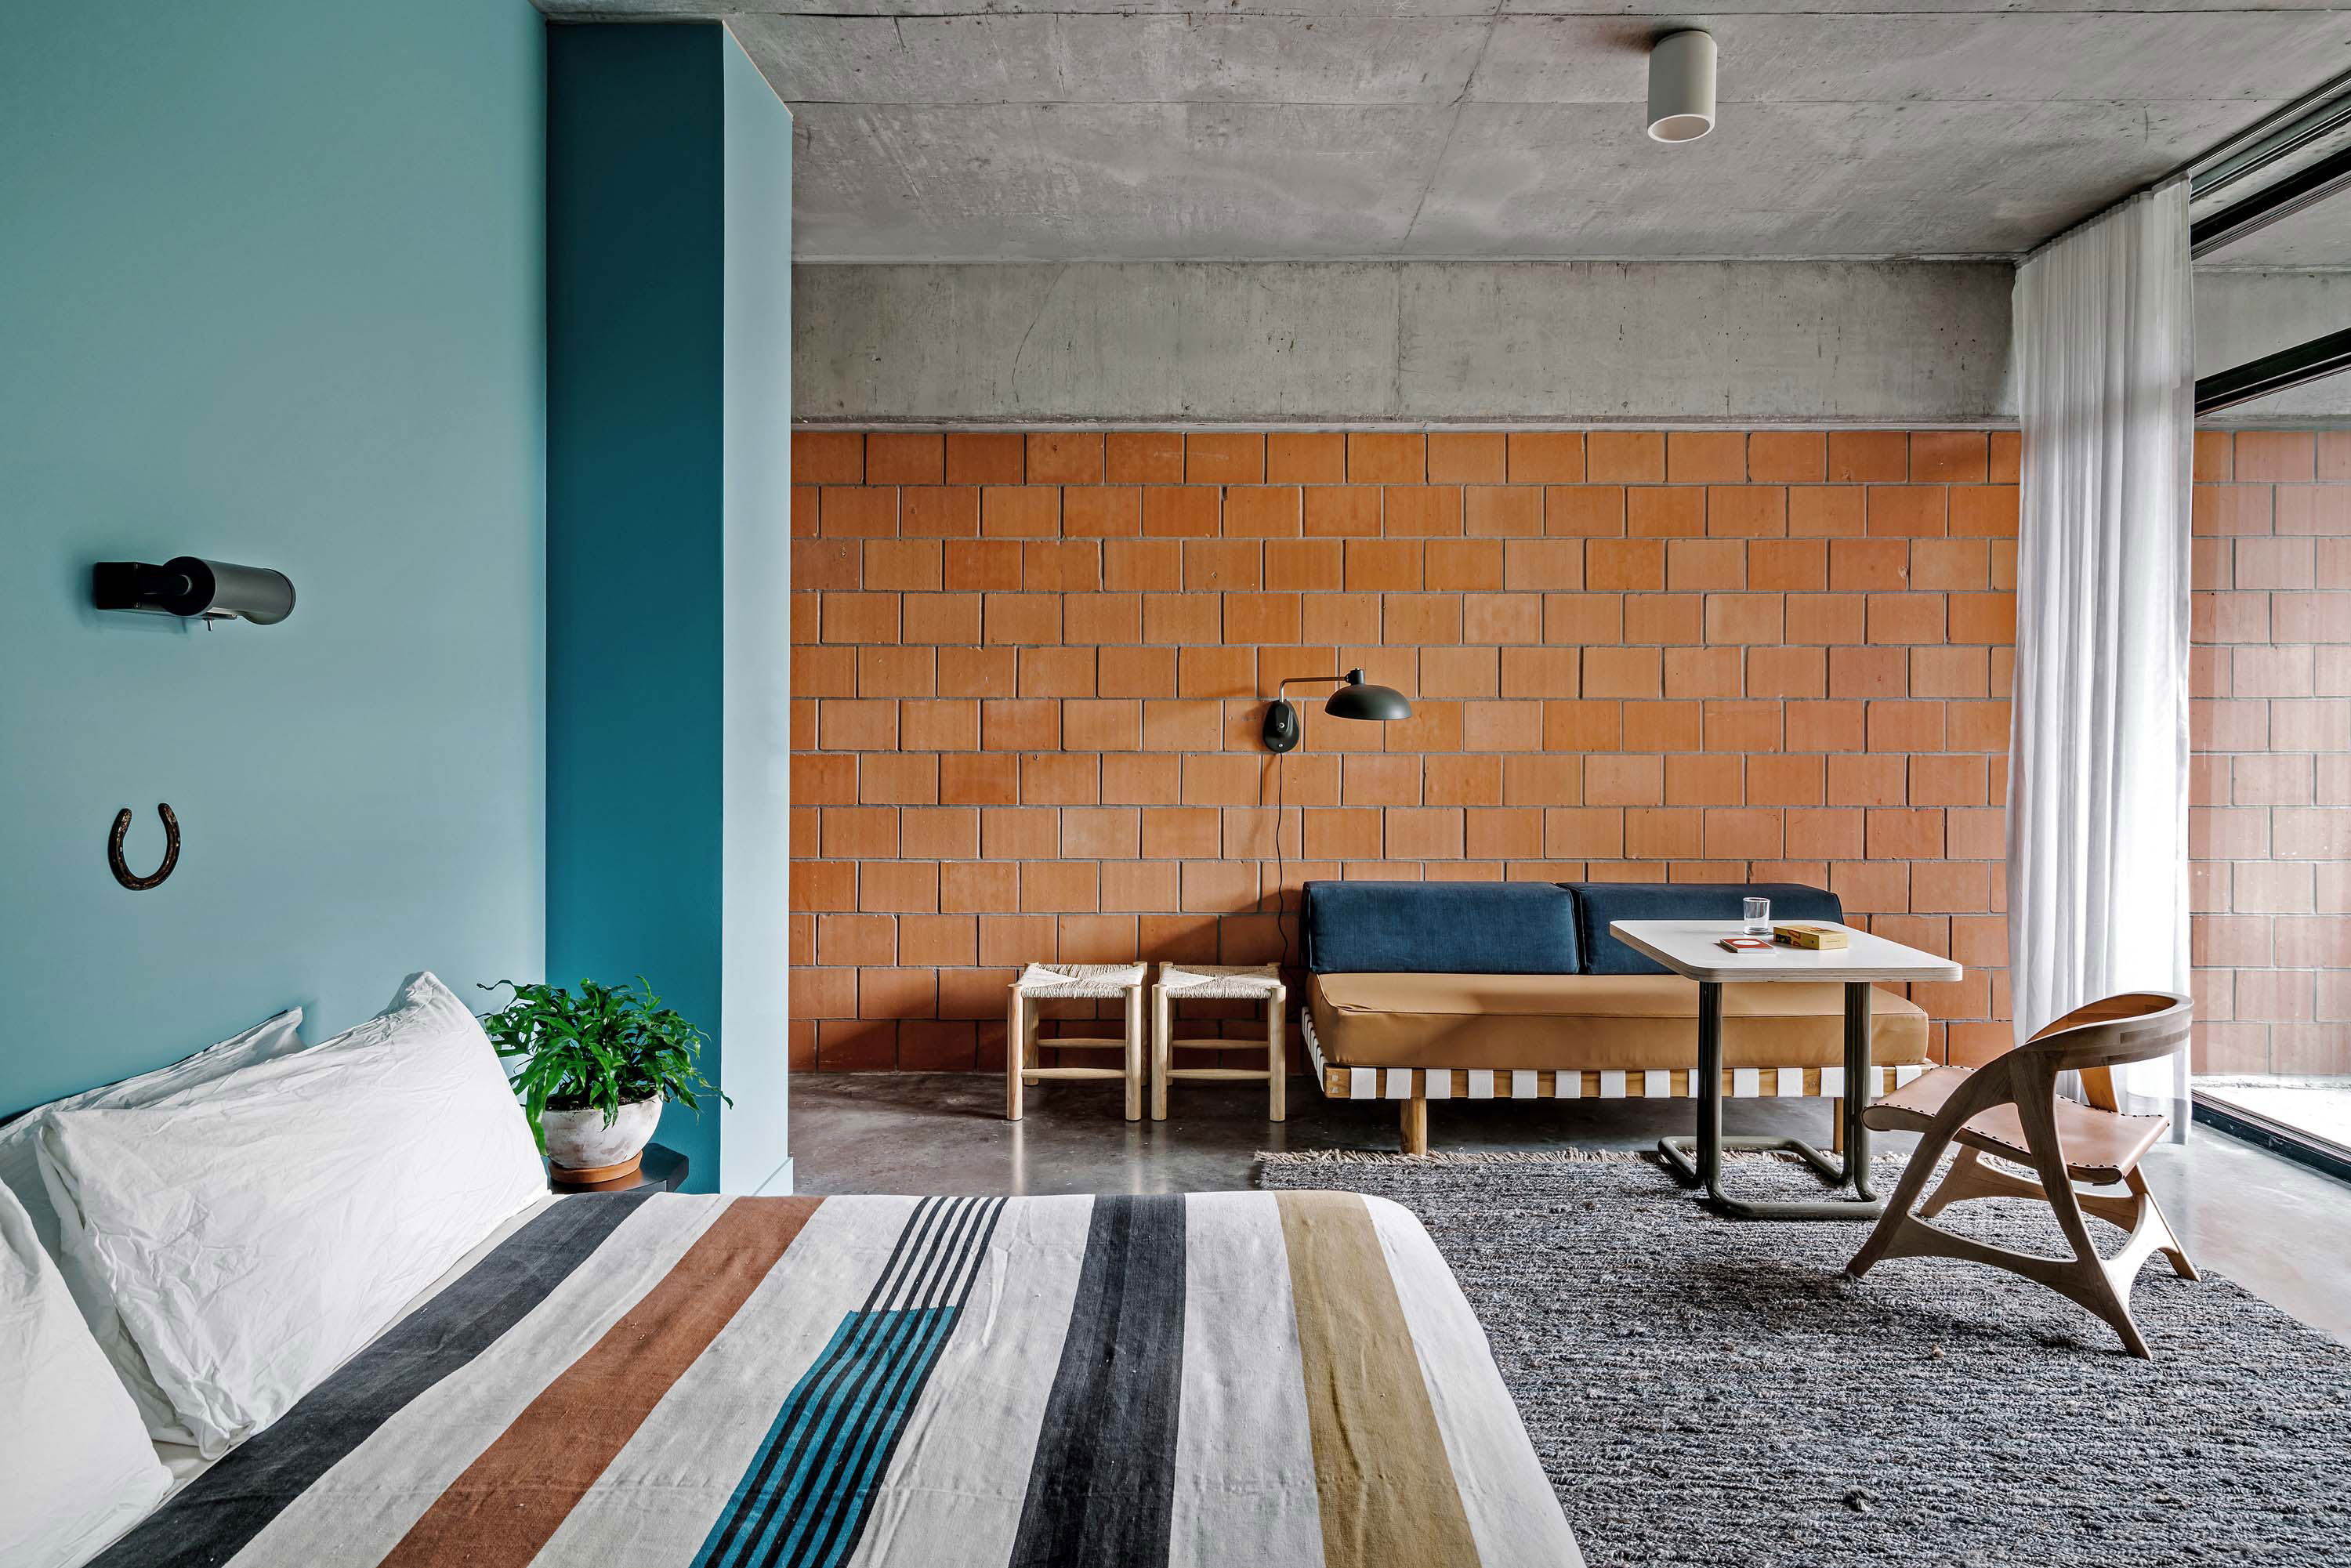 Interior photo of the Carpenter Hotel by Specht Novak Architects. Shot by Chase Daniel, featuring a room with brick walls, bed, and lounging area in neutral and blue tones.